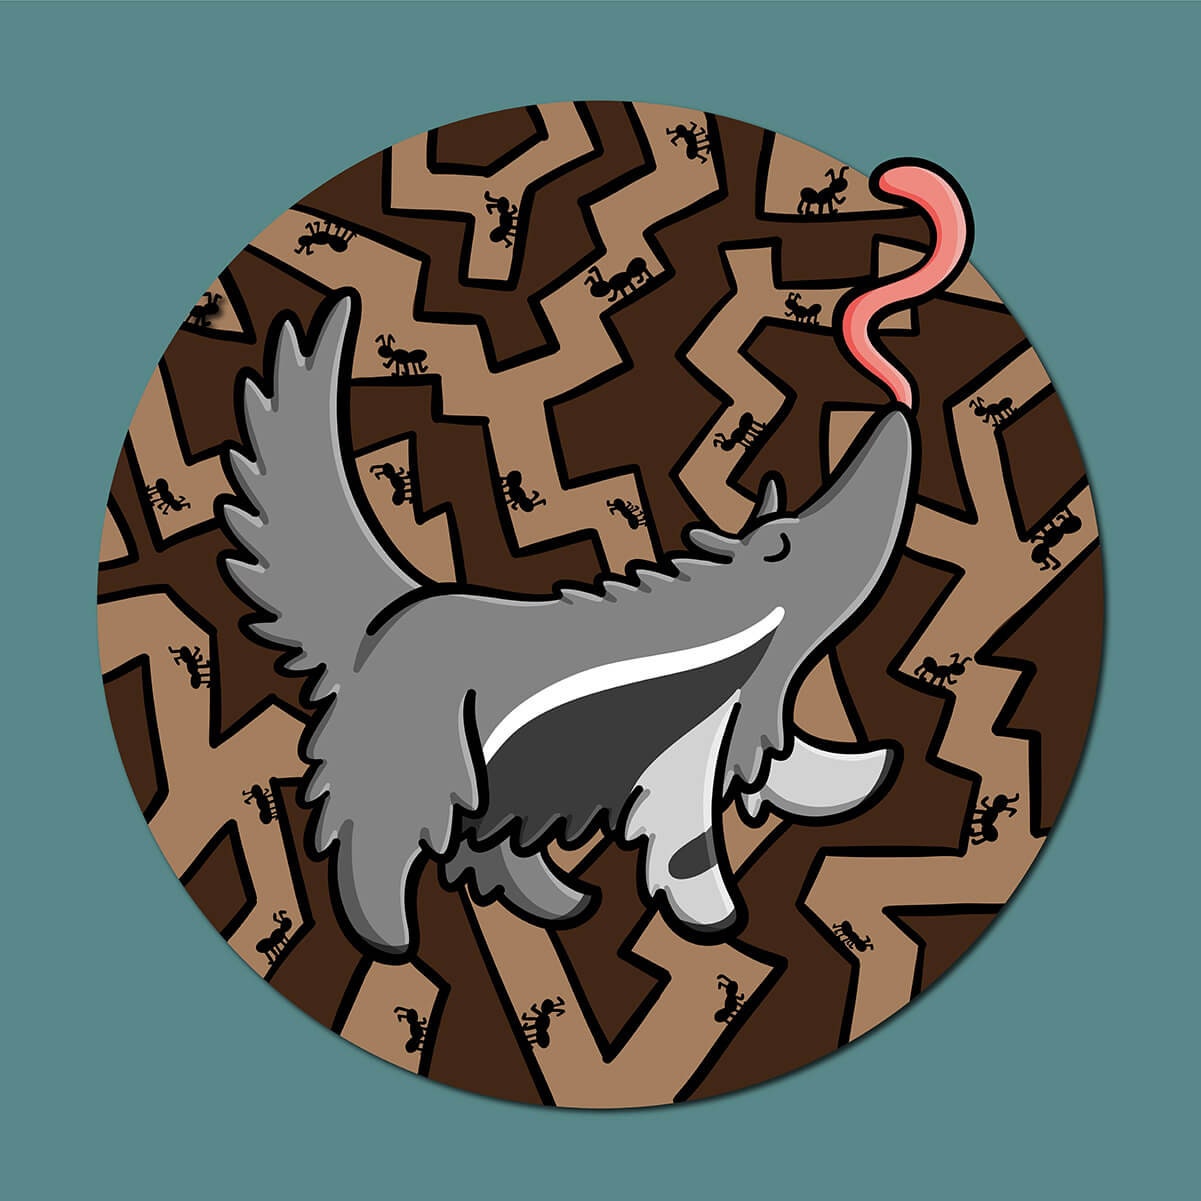 Anteater Sticker (Discontinued!)